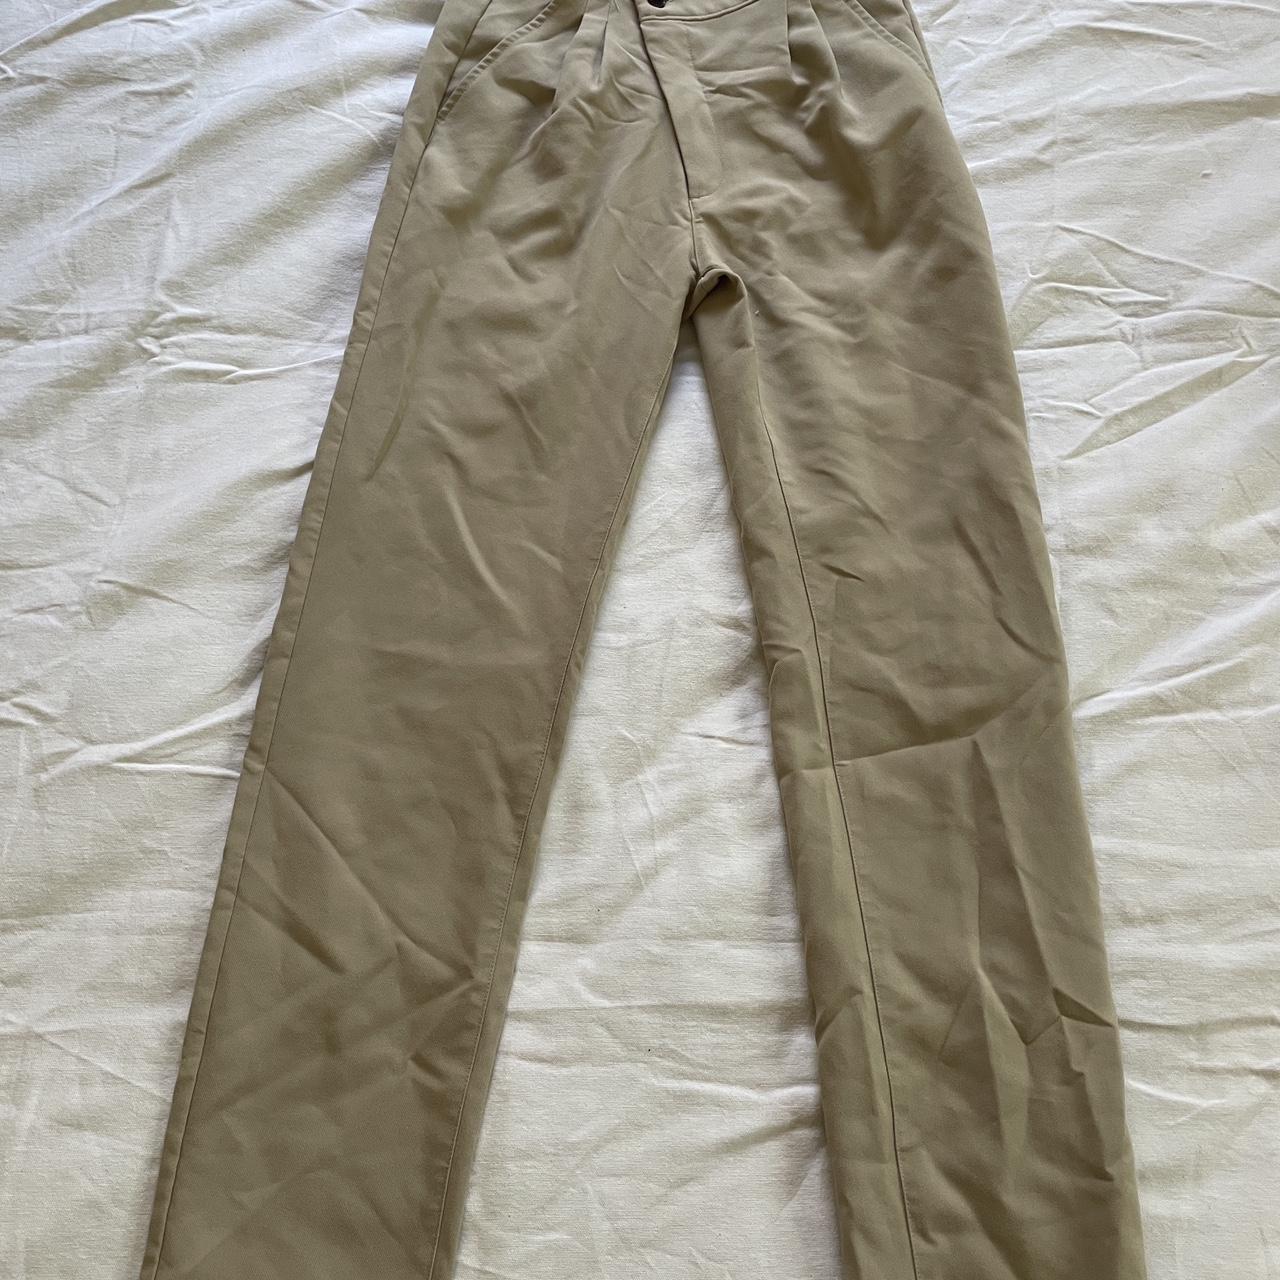 Abercrombie and Fitch Cross Waist Khaki Pants Can... - Depop